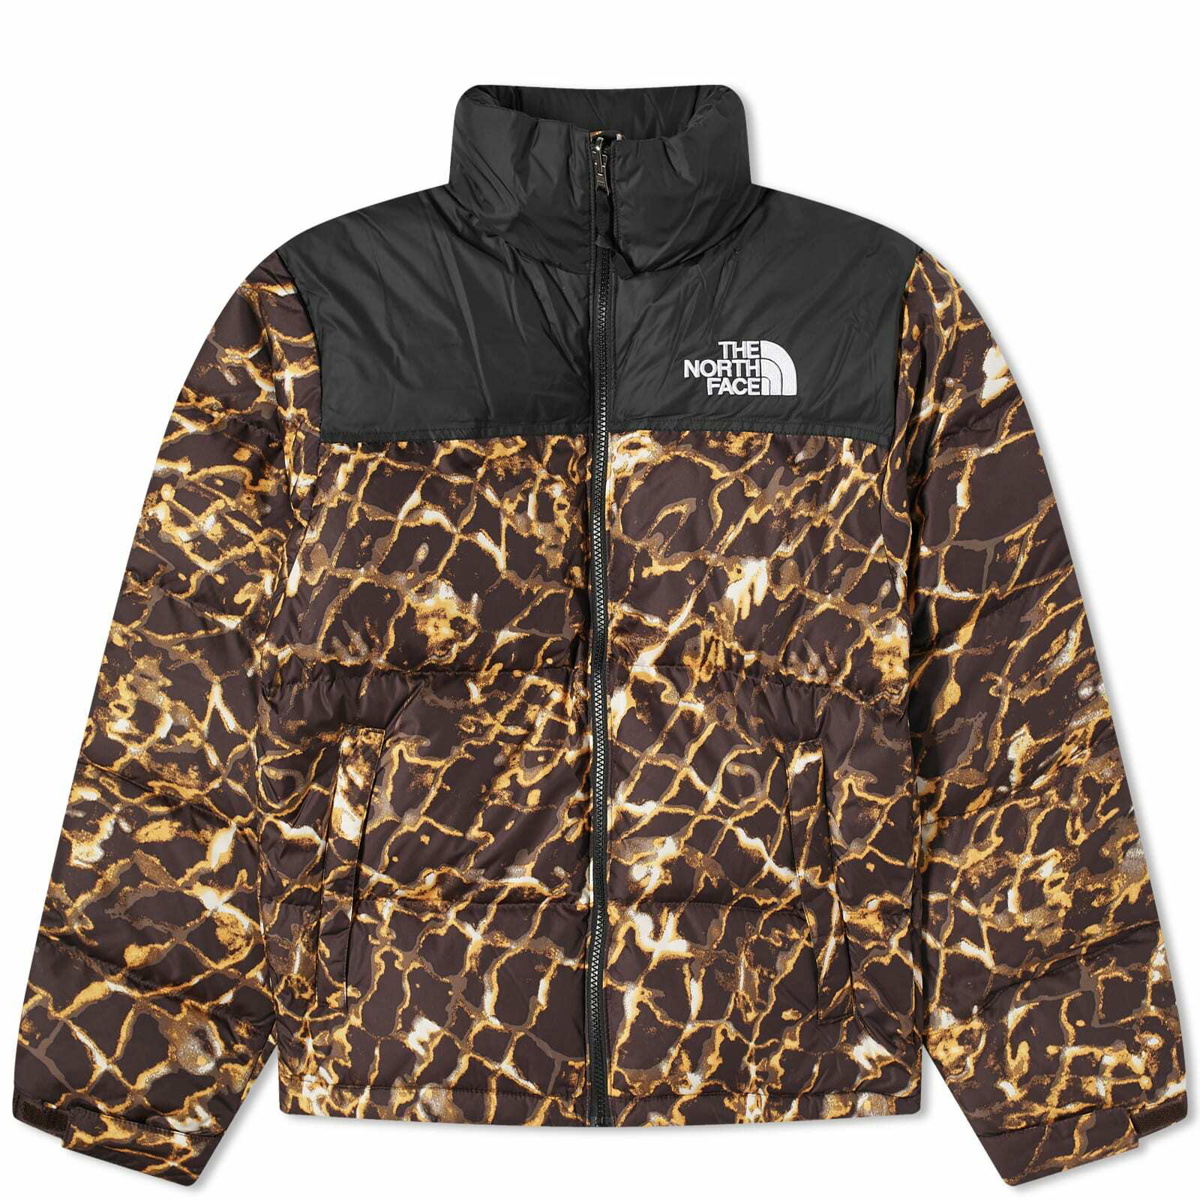 SUPREME x THE NORTH FACE Nuptse Jacket Yellow Leopard - 100% AUTHENTIC